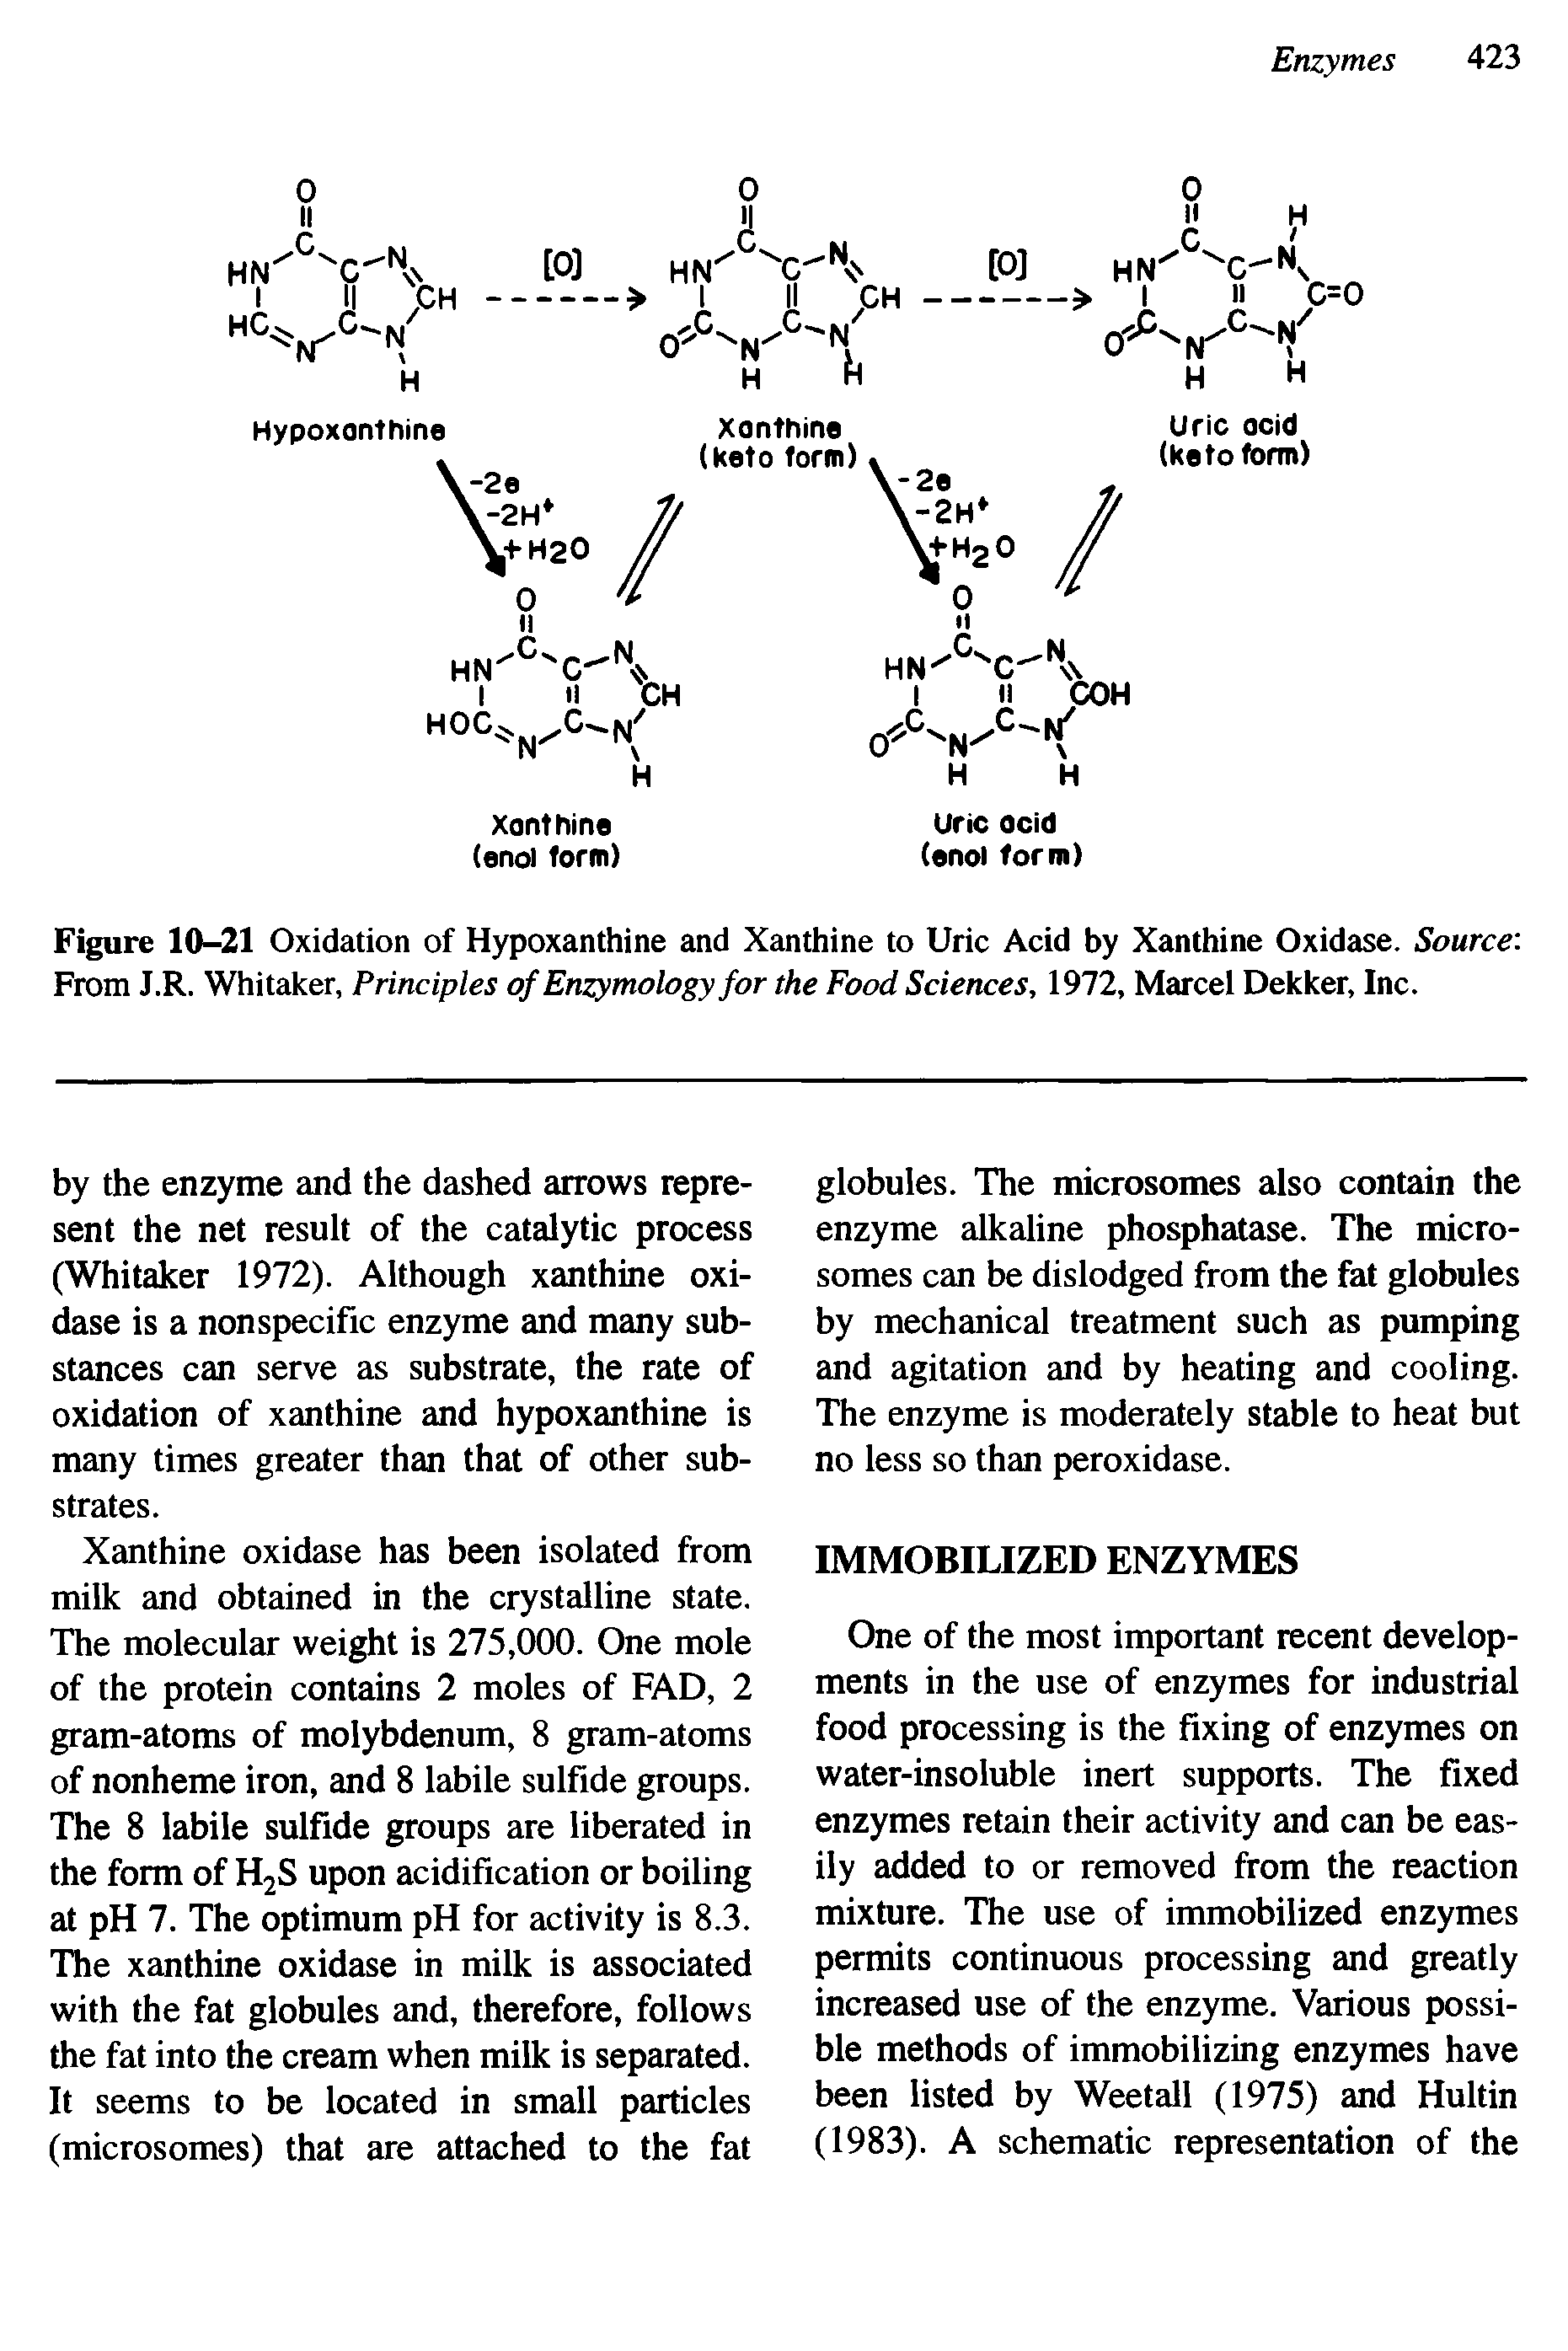 Figure 10-21 Oxidation of Hypoxanthine and Xanthine to Uric Acid by Xanthine Oxidase. Source From J.R. Whitaker, Principles ofEnzymology for the Food Sciences, 1972, Marcel Dekker, Inc.